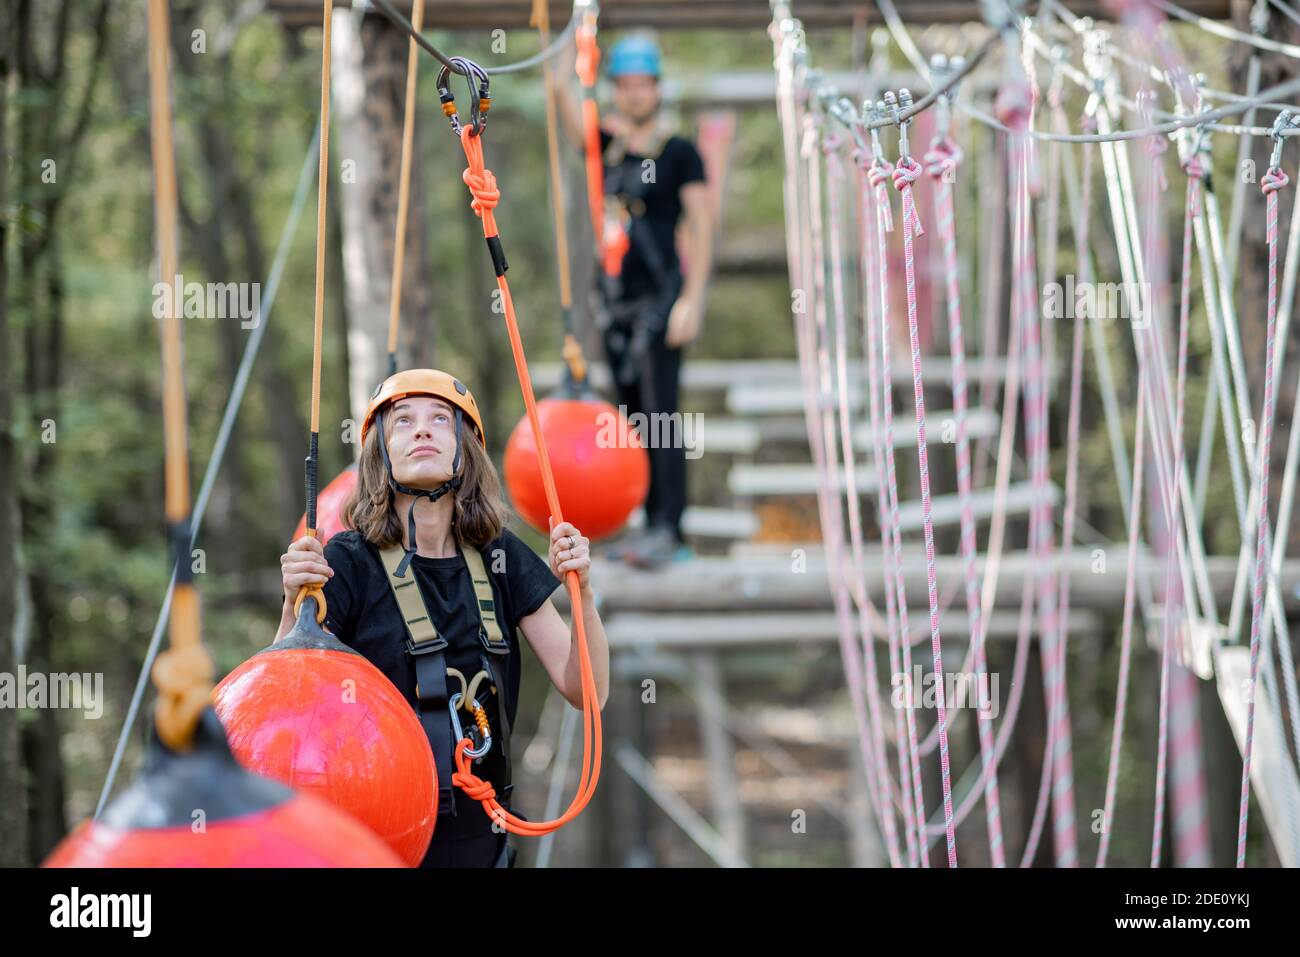 Well-equipped man and woman having an active recreation, climbing ropes in the park with obstacles outdoors Stock Photo